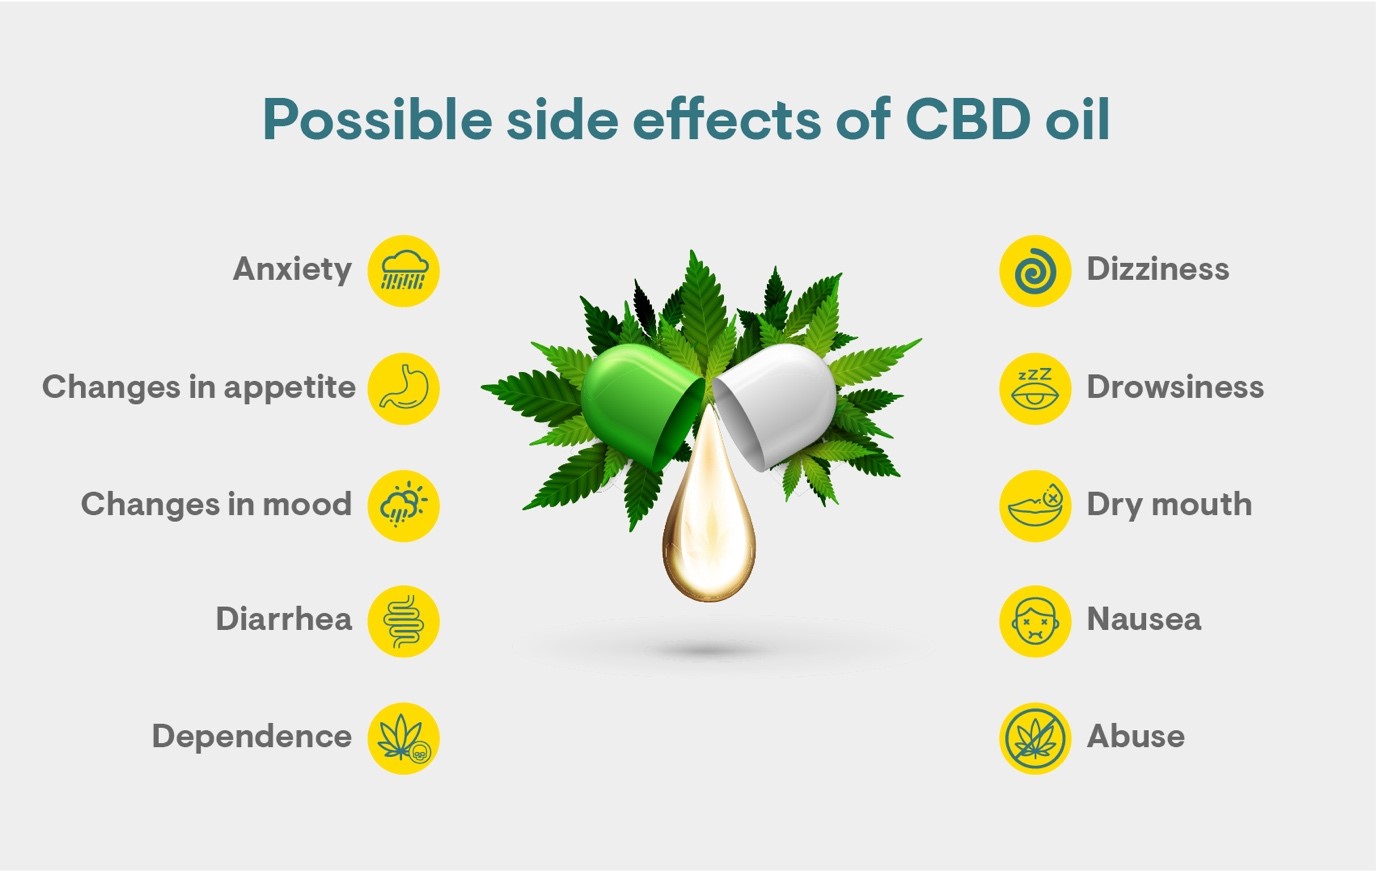 Image showing the possible side effects of CBD 